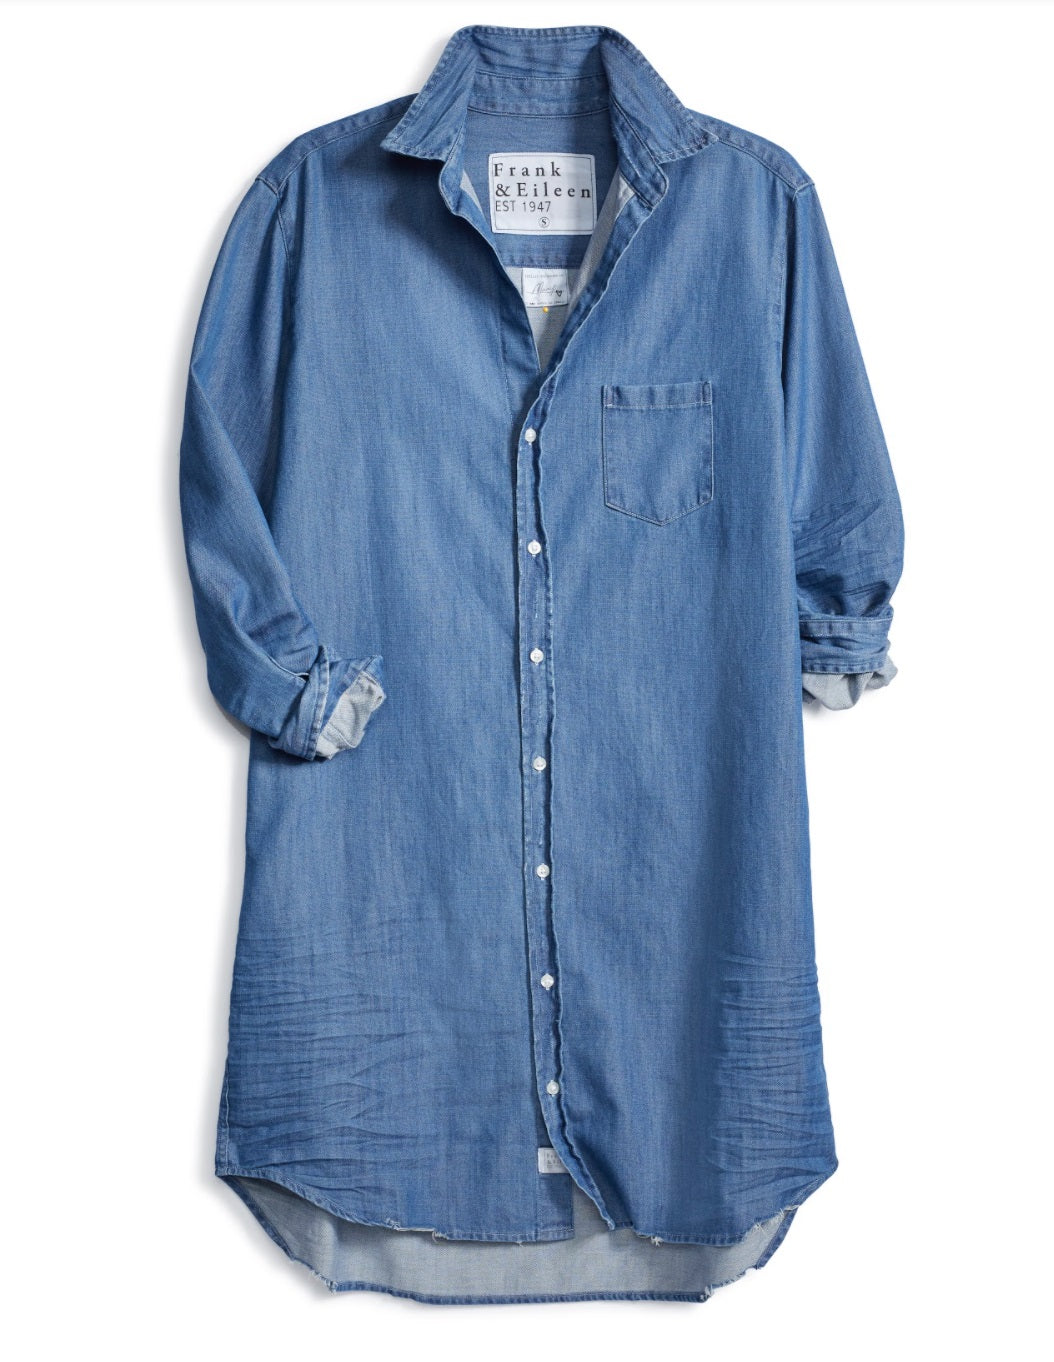 Frank & Eileen - Mary Woven Button Up Dress in Vintage Stonewashed Indigo